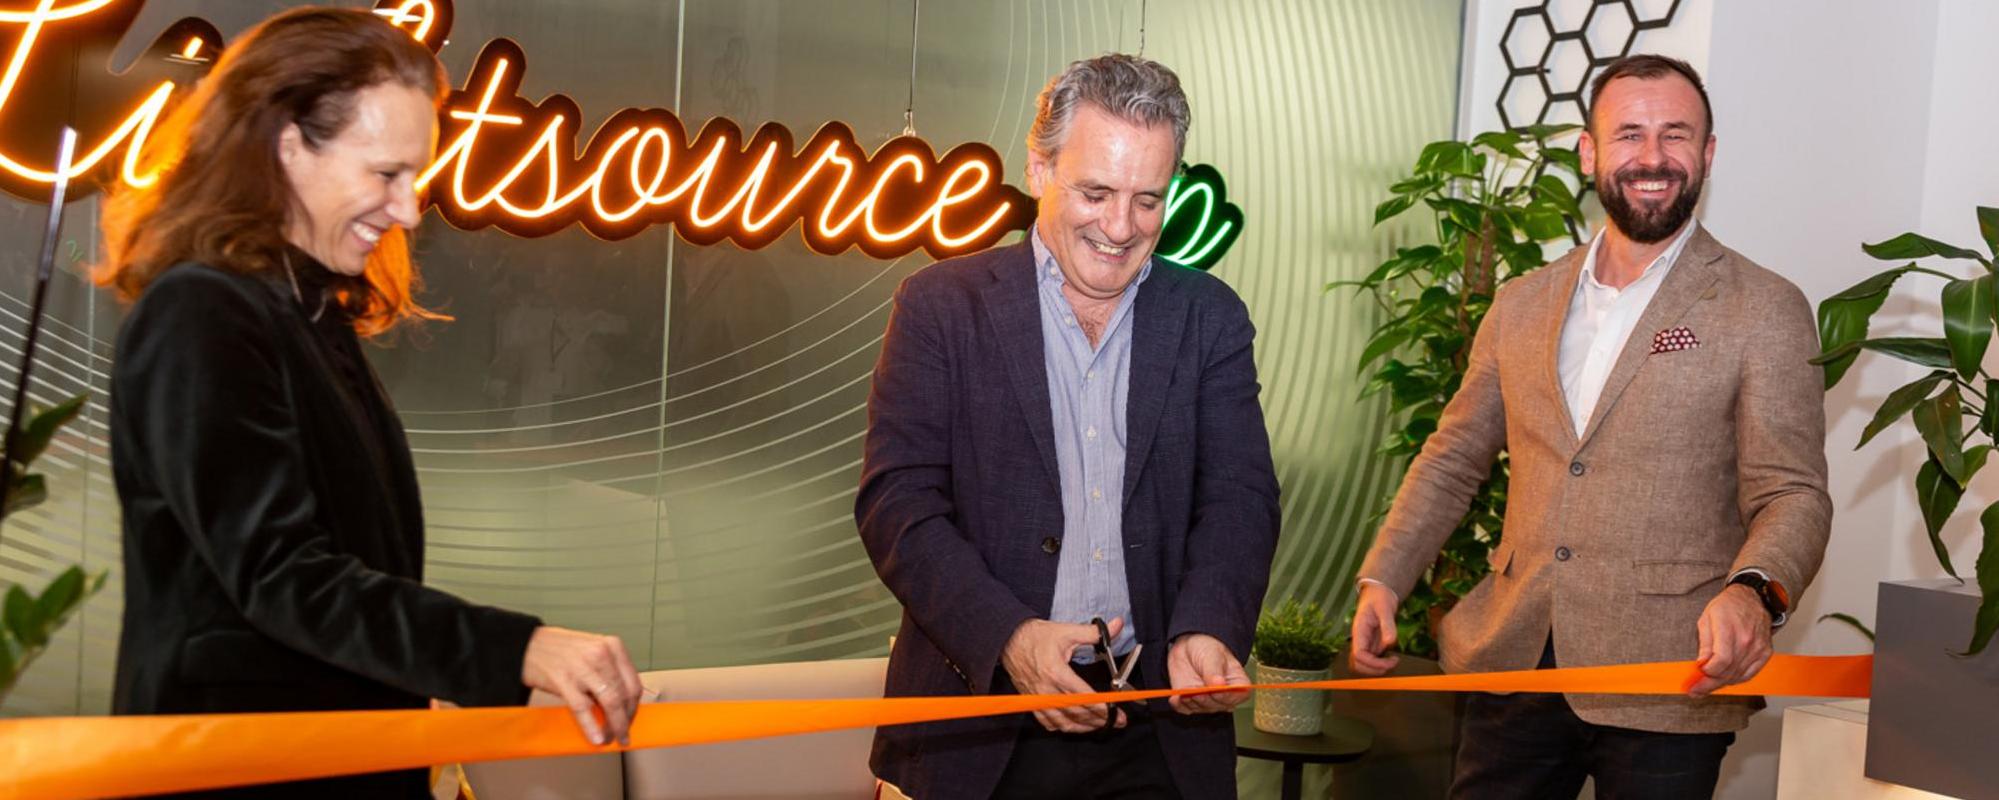 Kareen Boutonnat, Nick Boyle and Michal Glowacki cutting the ribbon at the opening of the Lightsource bp Warsaw office